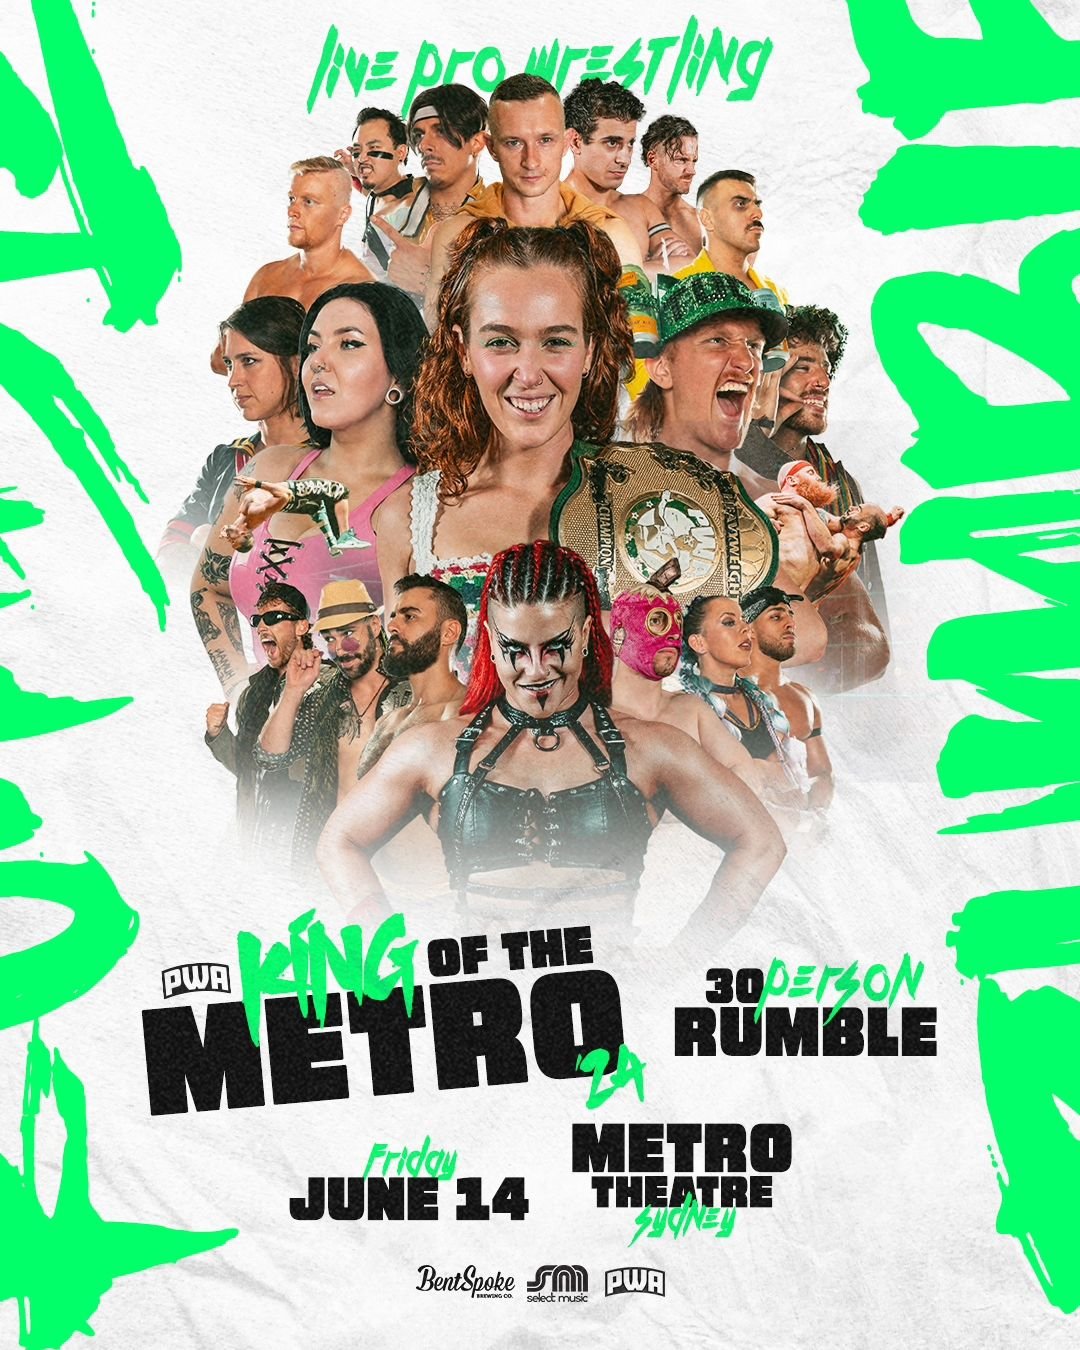 PWA Presents: King of the Metro 👑

PWA is BACK in the heart of the Sydney CBD with the 30 Person King of the Metro RUMBLE! 

➕ PWA Heavyweight Championship: Jessica Troy Vs DELTA - Pro Wrestler

METRO THEATRE 📌 | JUNE 14 📆
GET TICKETS NOW 🎟️⬇️
IN